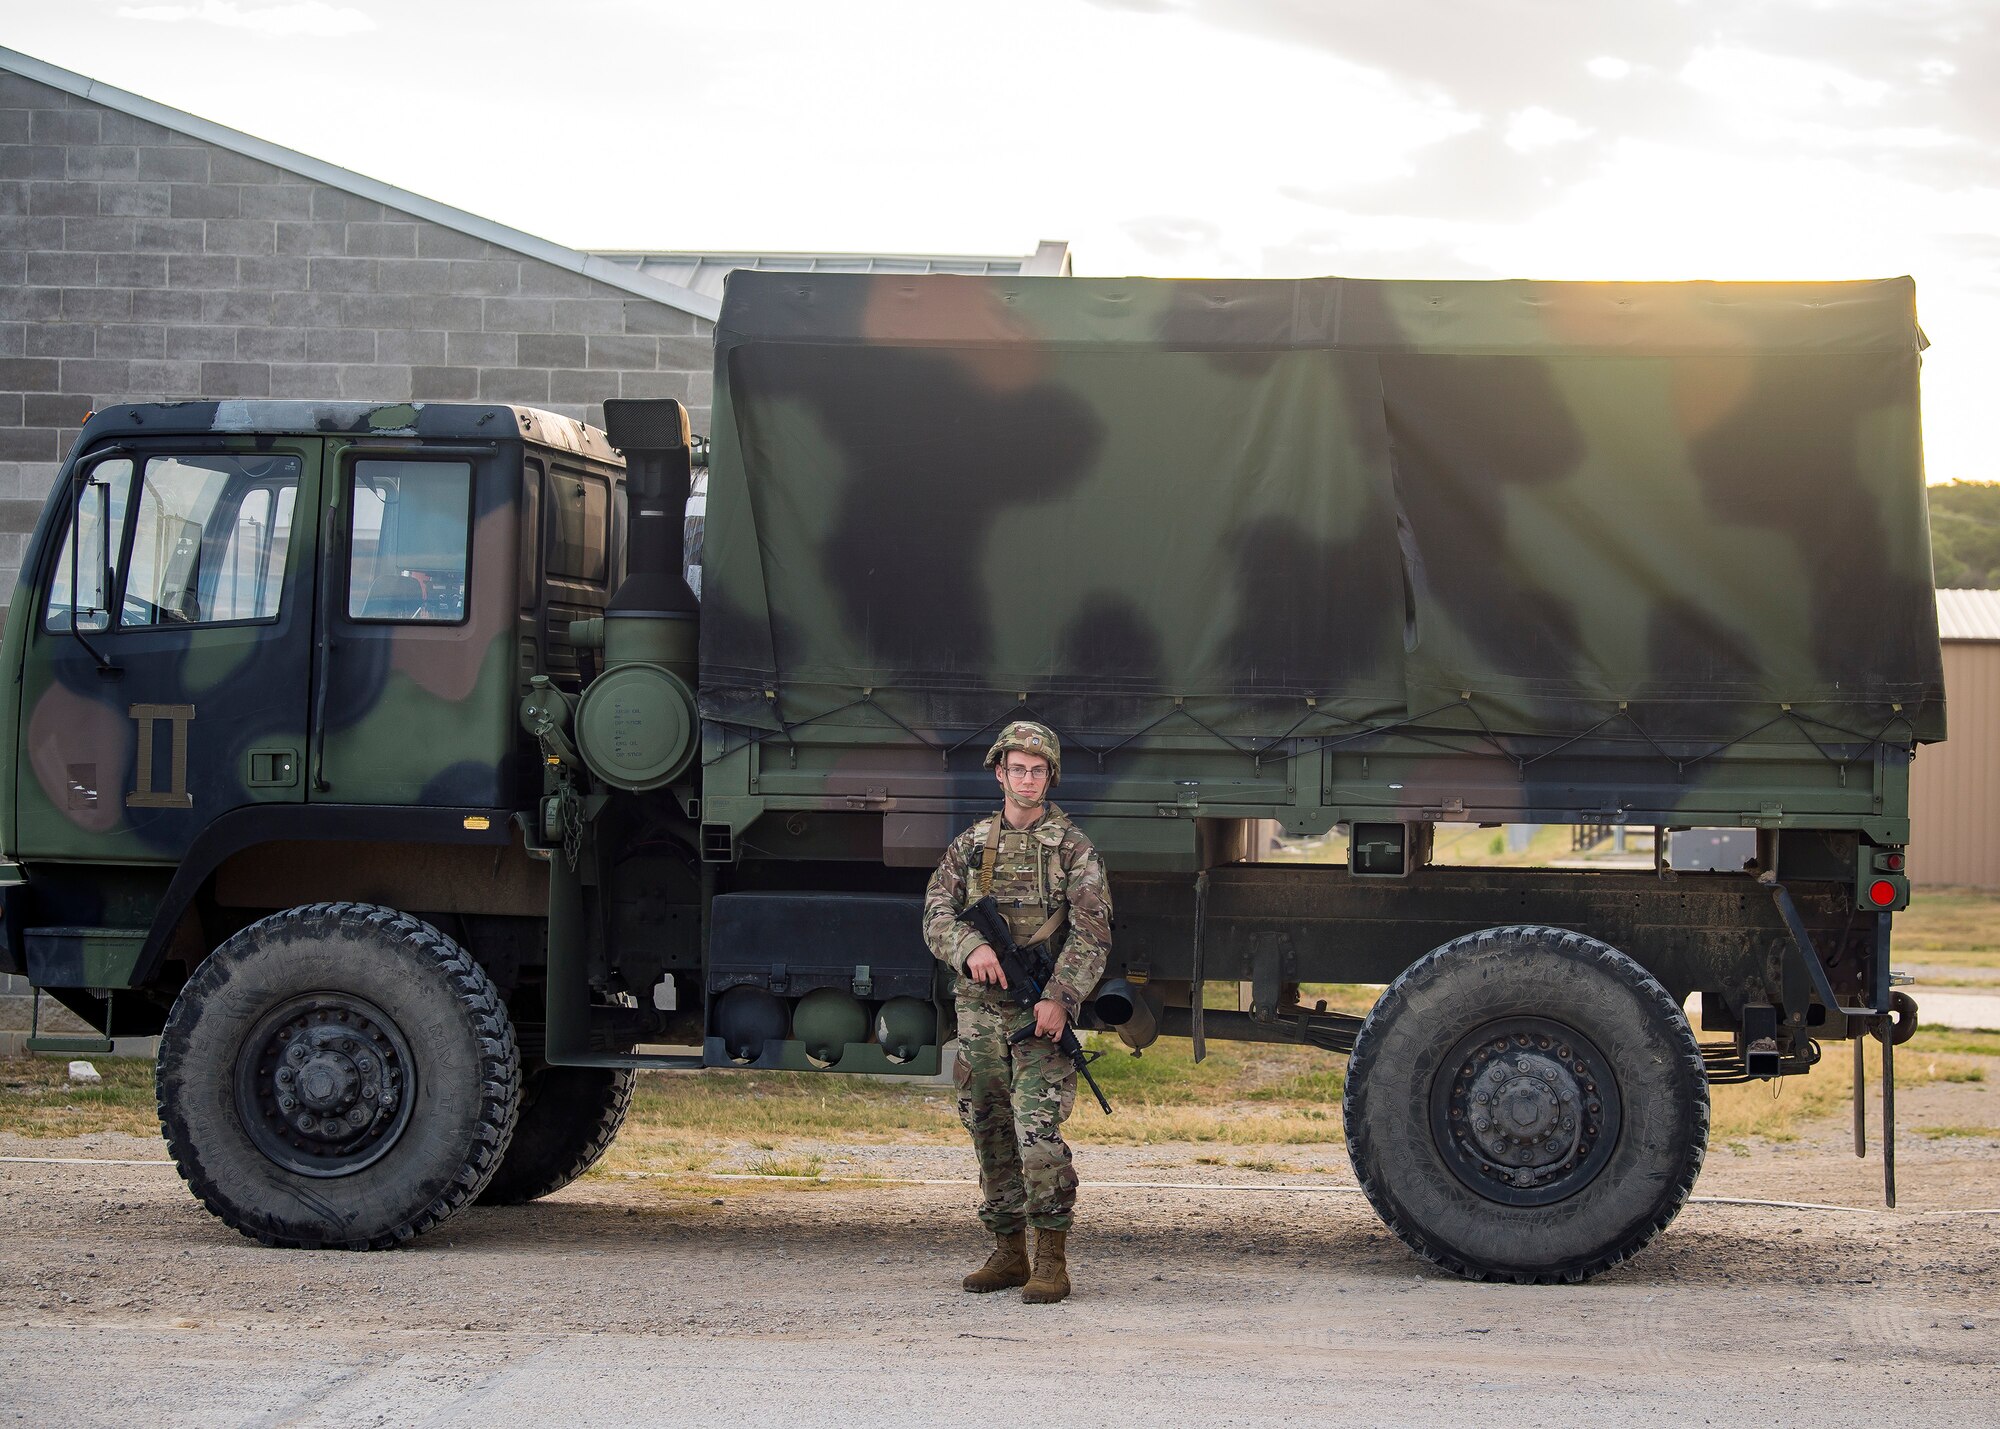 A Staff Weather Officer from the 3d Weather Squadron (WS), provides security for a Light Medium Tactical Vehicle during a certification field exercise (CFX), July 29, 2019, at Camp Bowie Training Center, Texas. The CFX was designed to evaluate the squadron’s overall tactical ability and readiness to provide the U.S. Army with full spectrum environmental support to the Joint Task Force (JTF) fight. While deployed, the Army relies on the 3d WS to provide them with current ground weather reports. These reports are then employed by commanders on the ground as they plan the best tactics and approaches to accomplish the mission. (U.S. Air Force photo by Airman 1st Class Eugene Oliver)